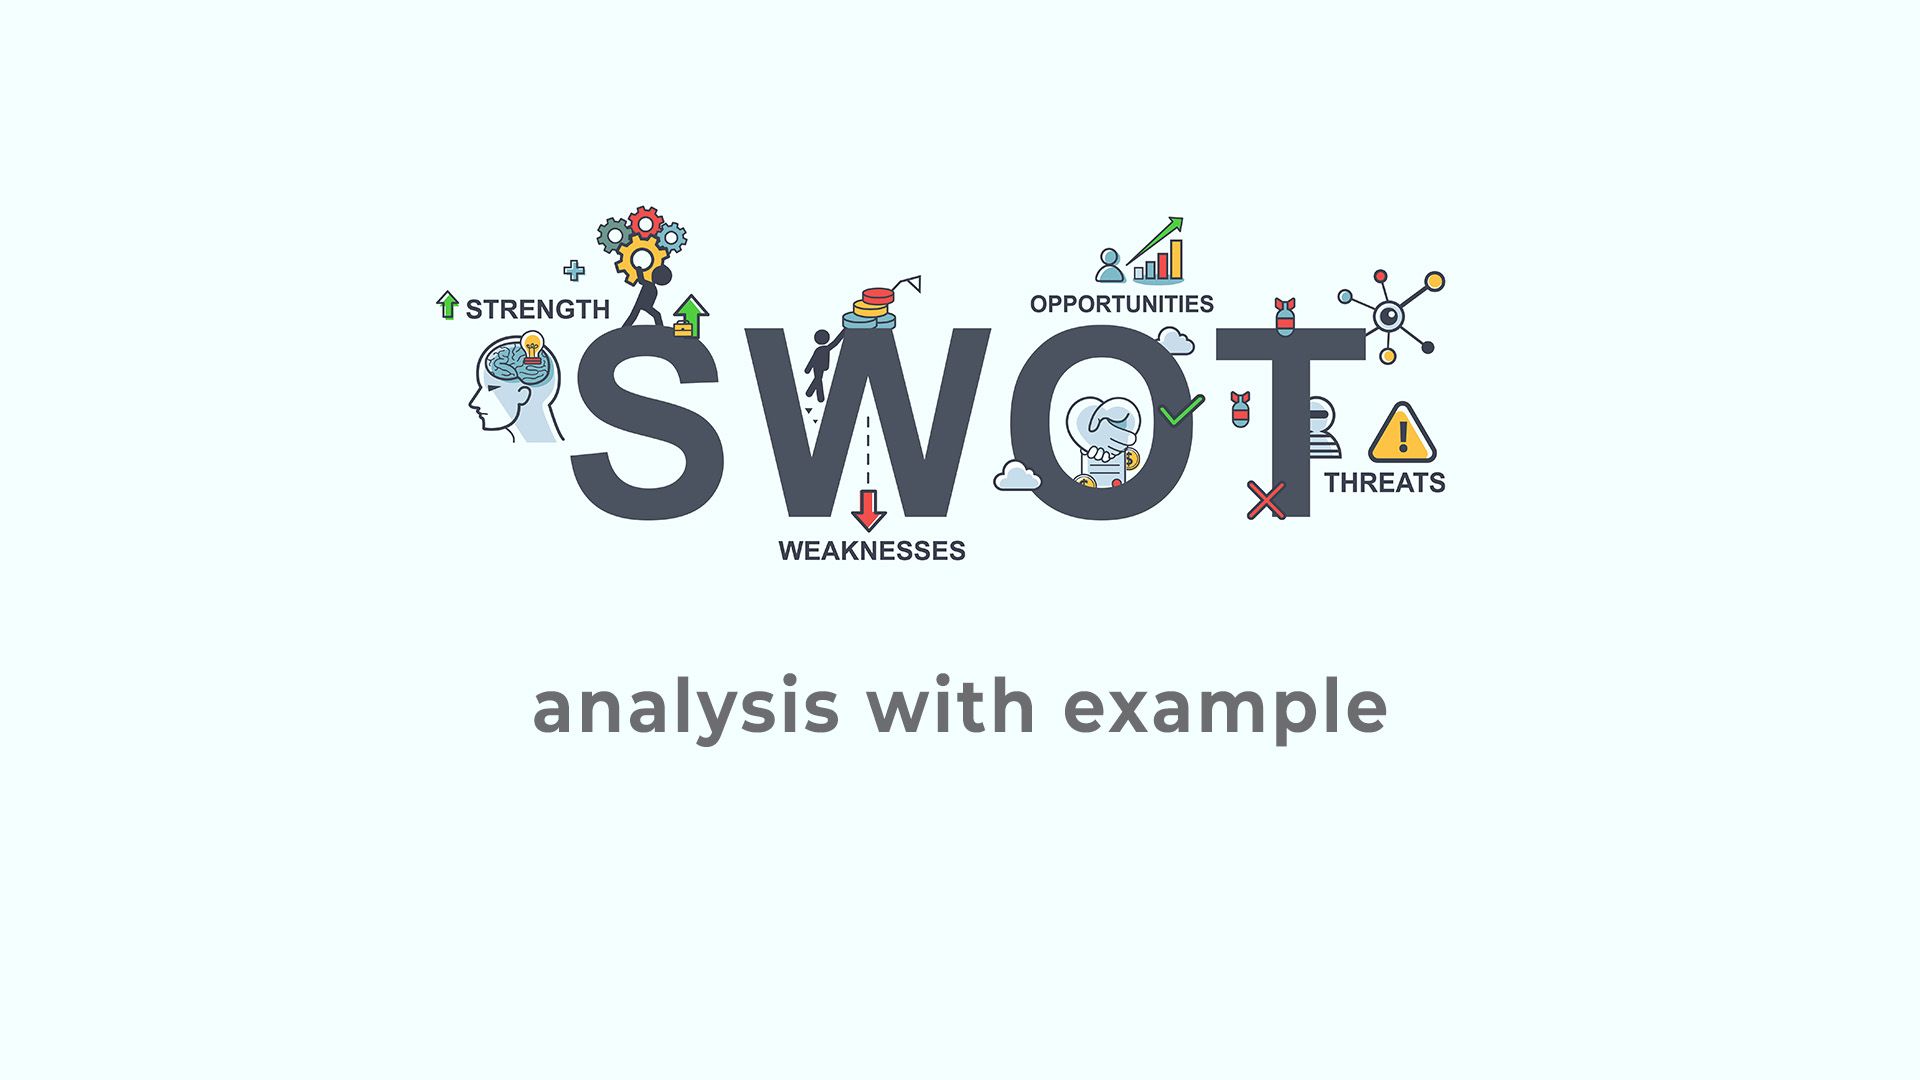 SWOT analysis with example